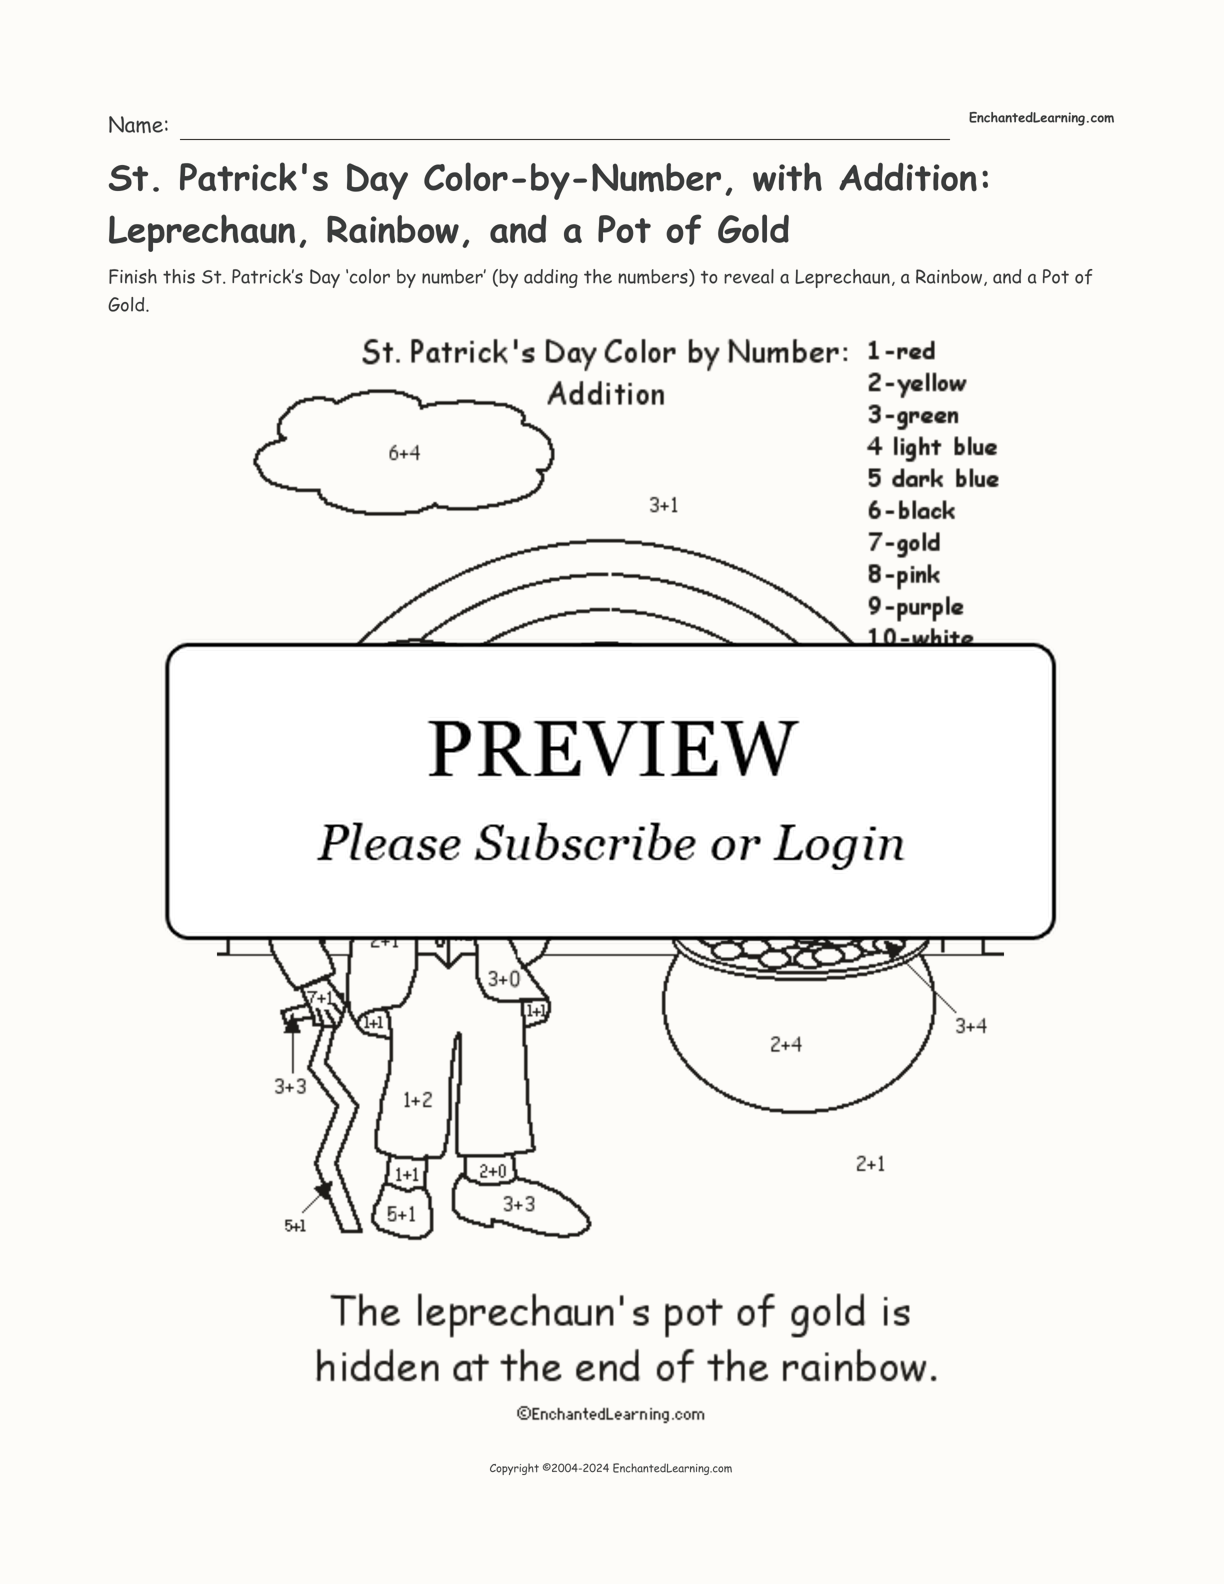 St. Patrick's Day Color-by-Number, with Addition: Leprechaun, Rainbow, and a Pot of Gold interactive printout page 1